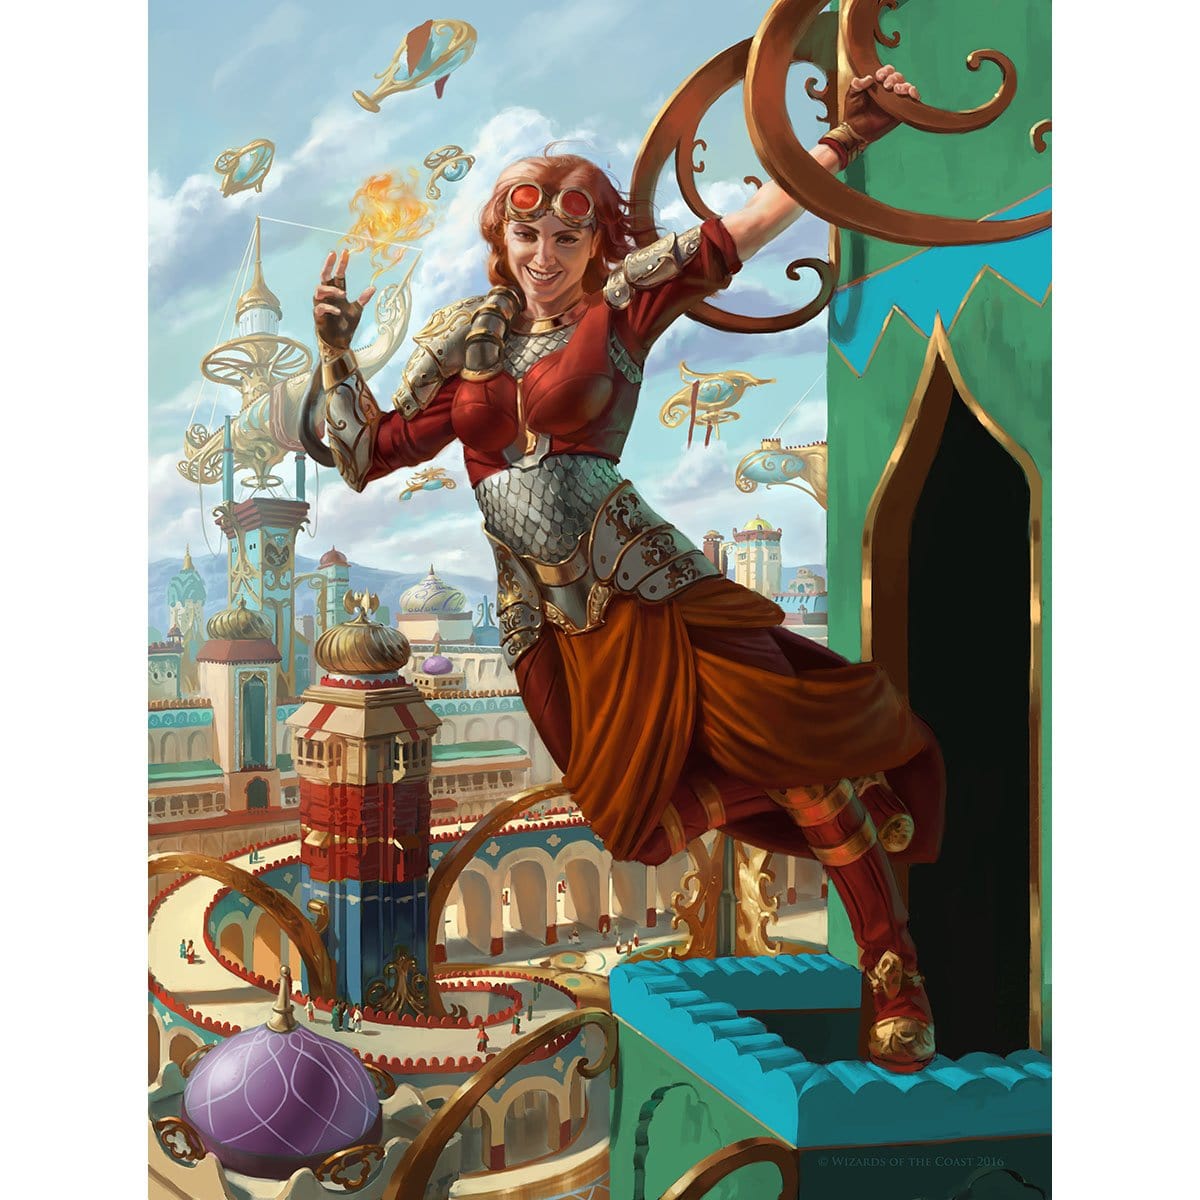 Chandra, Pyrogenius Print - Print - Original Magic Art - Accessories for Magic the Gathering and other card games